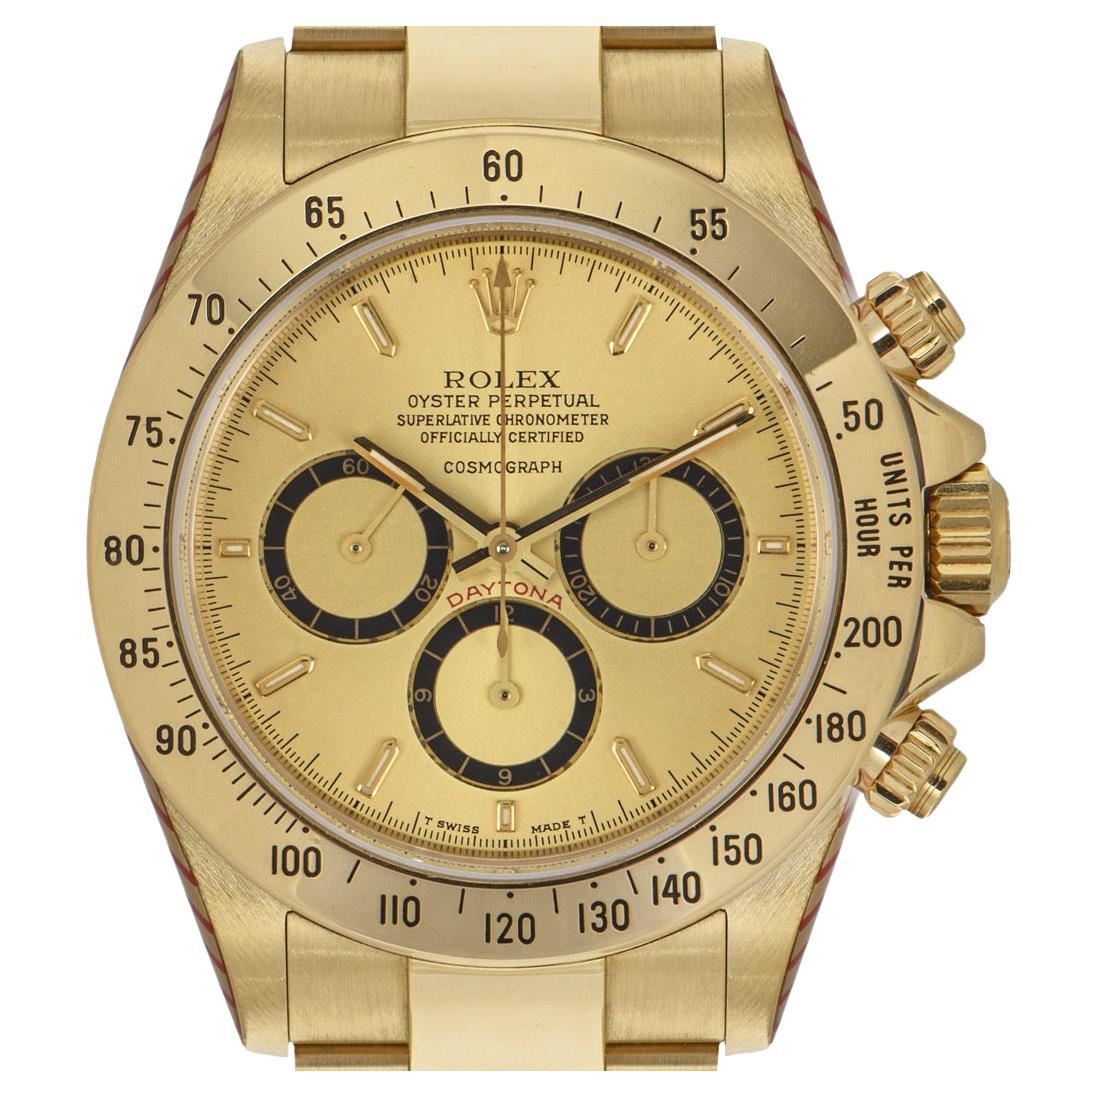 A unique R series Zenith Daytona crafted in yellow gold by Rolex. Features a champagne floating dial with applied hour markers and 3 sub dials featuring a 30 minute, a 12 hour, a small seconds recorder with a distinctive inverted 6. Complimenting